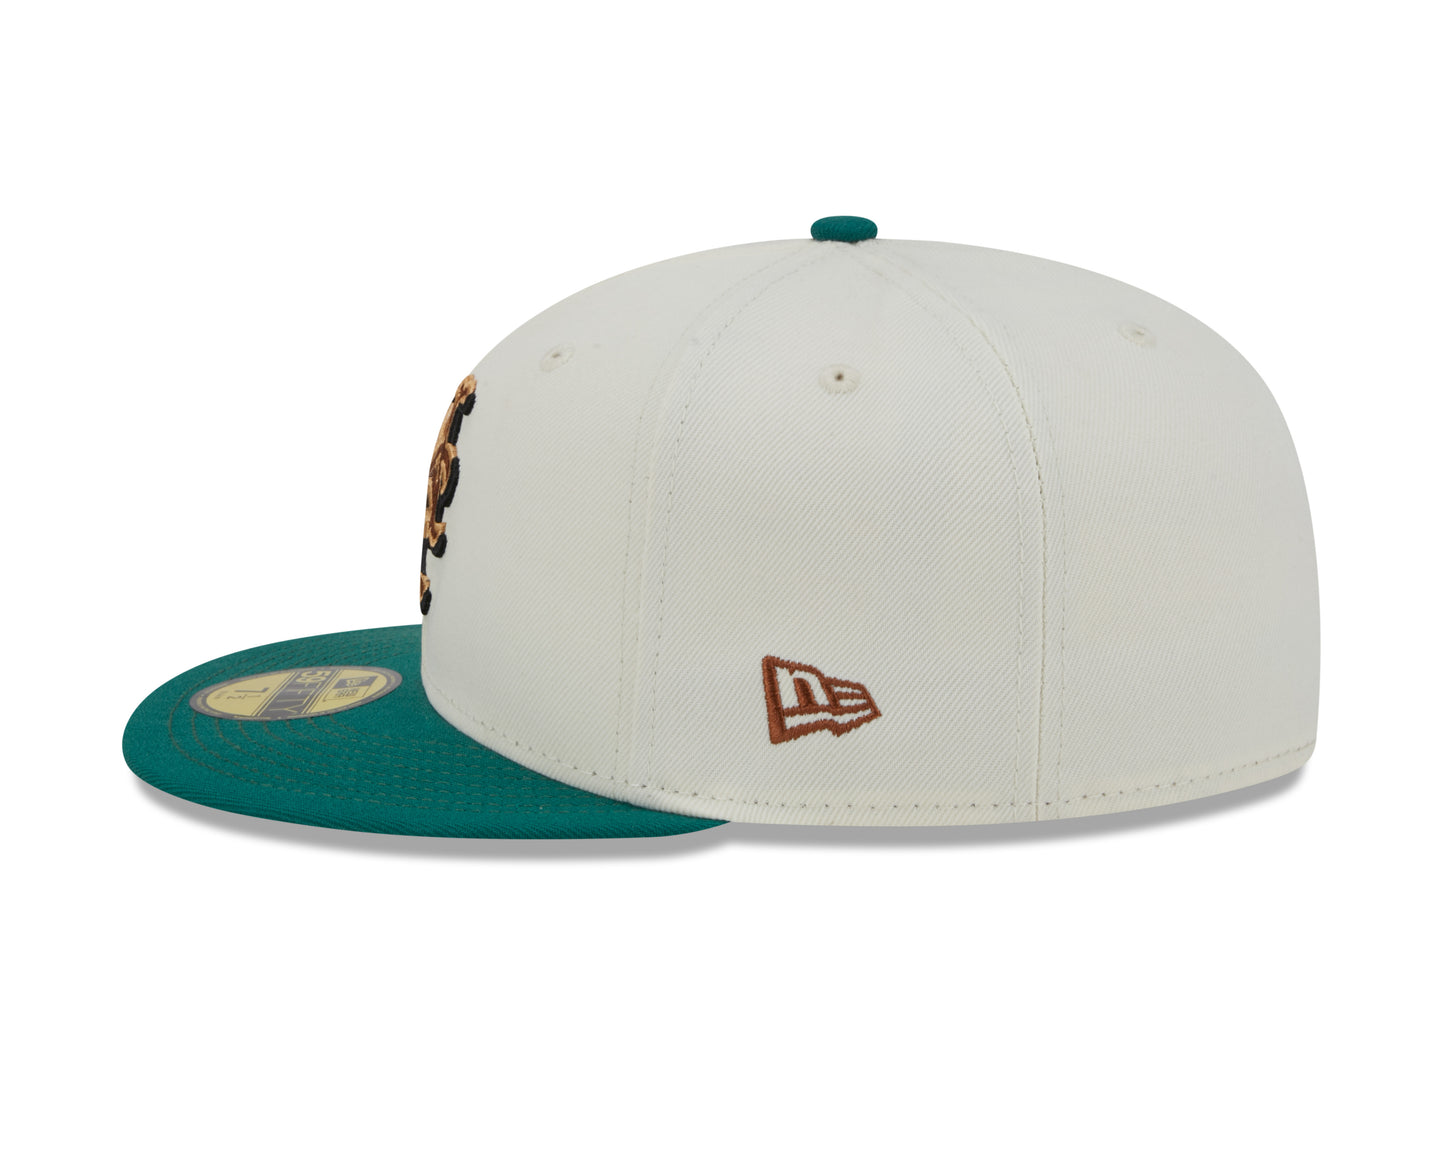 New Era - 59Fifty Fitted Cap - CAMP - New York Mets 25th Anniversary - White/Green - Headz Up 